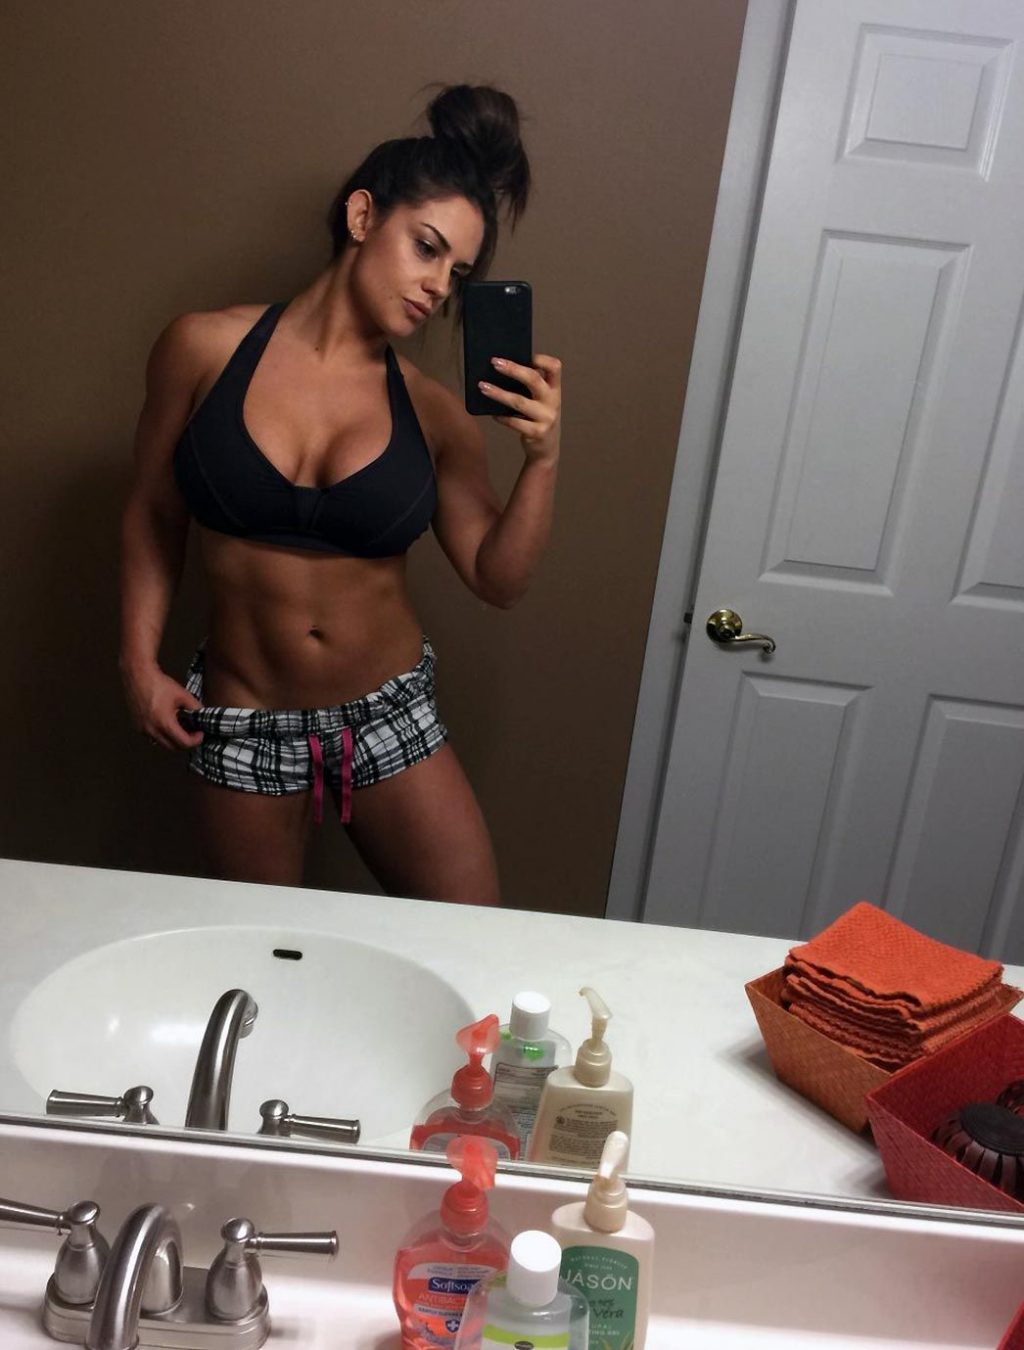 Alright, guys, so here are all of the Celeste Bonin’s nude photos that leak...